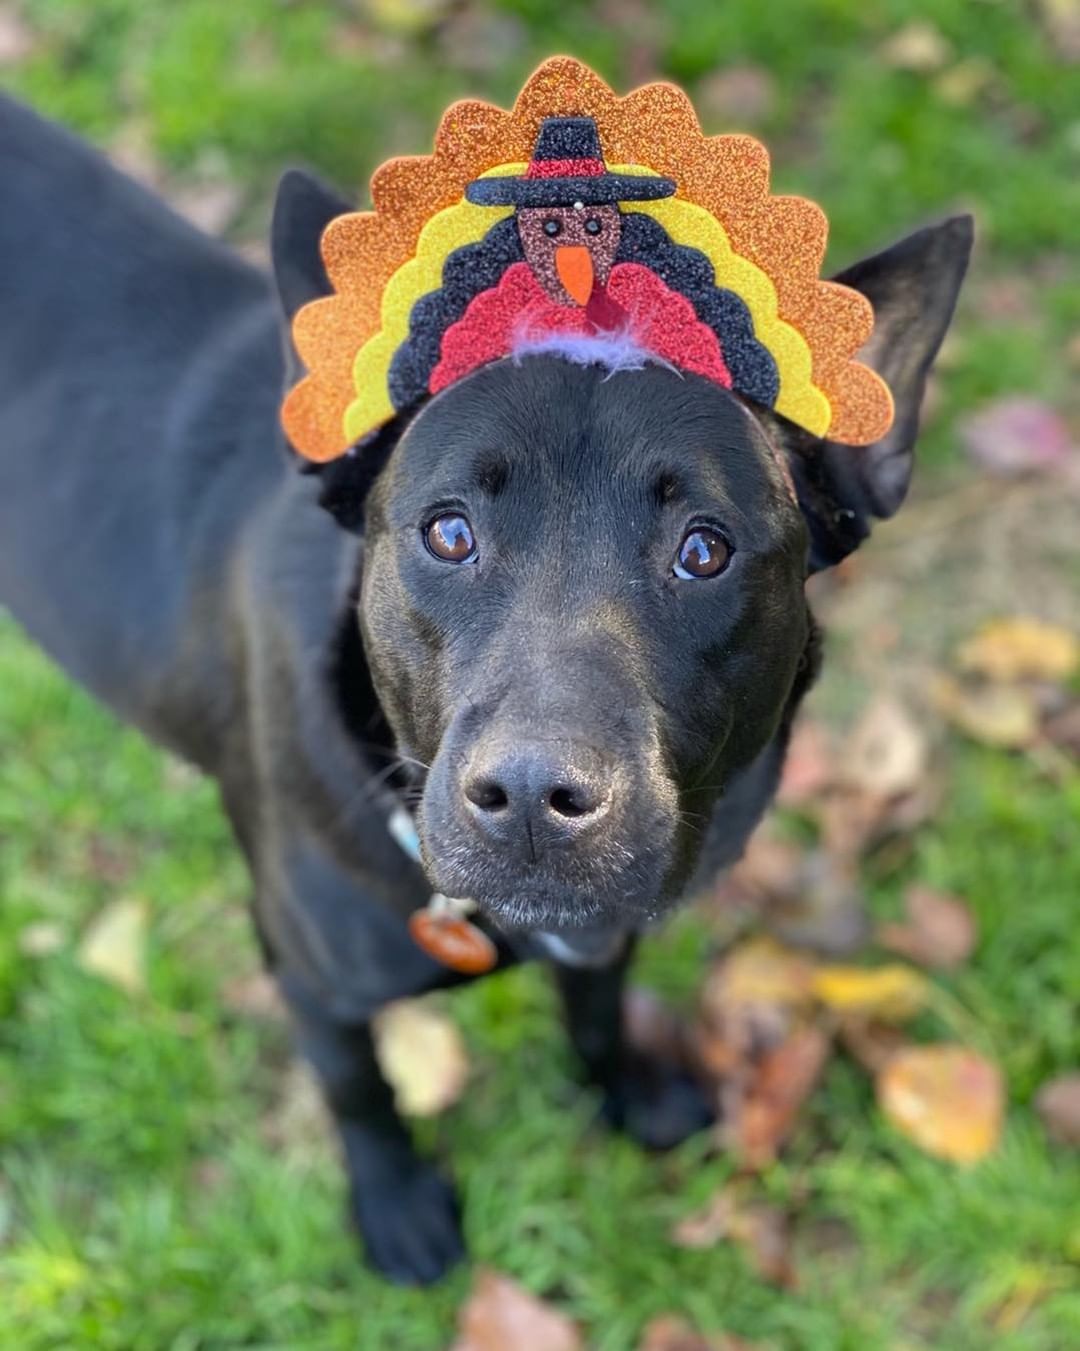 Happy Thanksgiving from all of us at Brown Dog Coalition! 🦃 

Today (and every day) we are thankful for you: our adopters, fosters, donors, volunteers, and supporters. Oh, and puppy kisses, kitten purrs, and patient foster pups wearing hats. Those are pretty great too. 😉